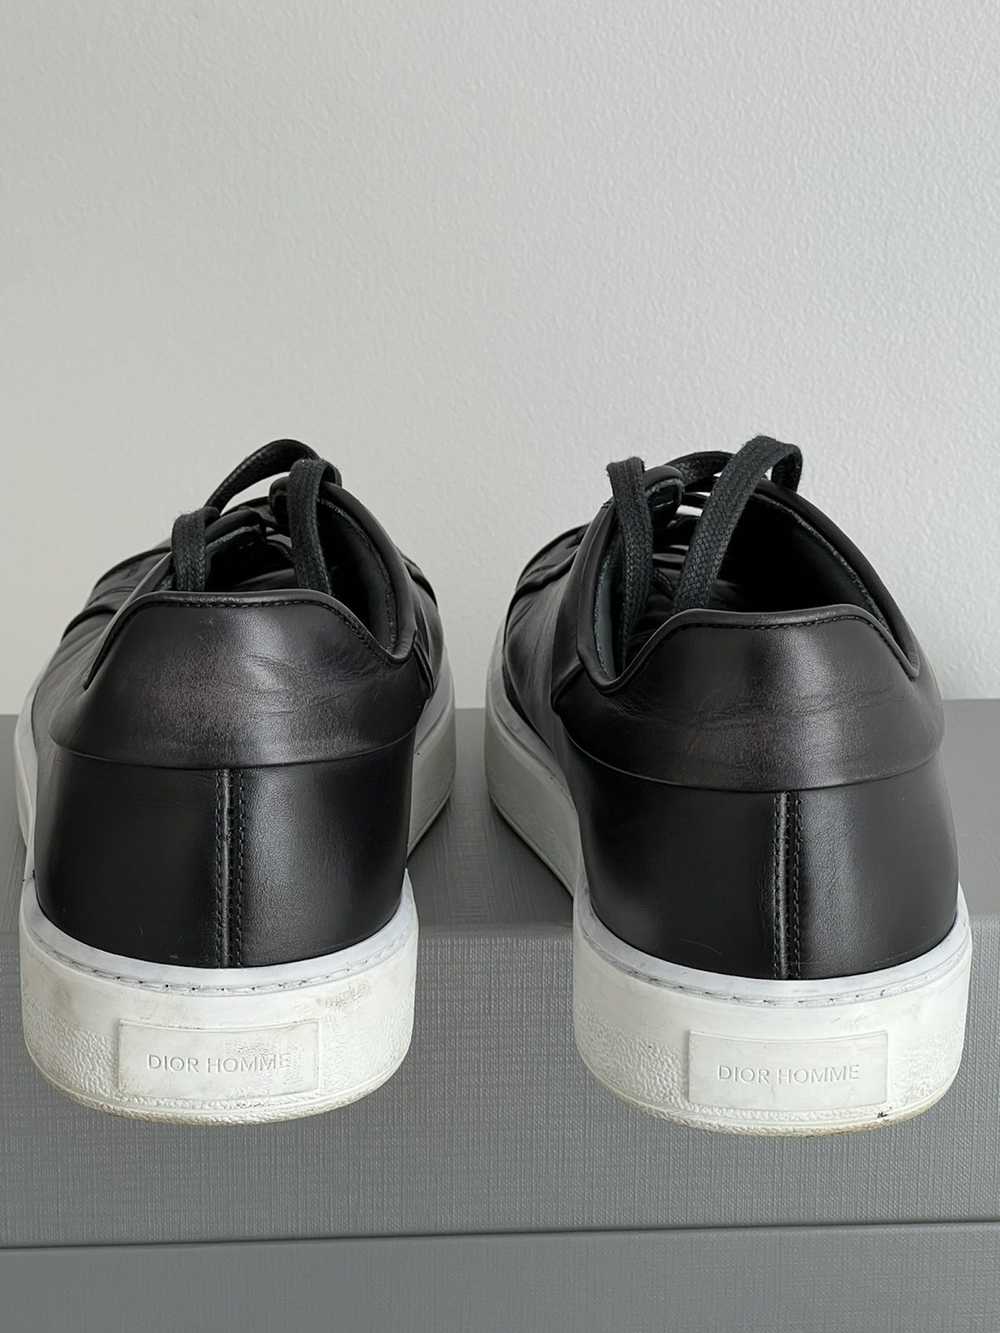 Dior Basic Dior Homme black & white sneakers - image 2